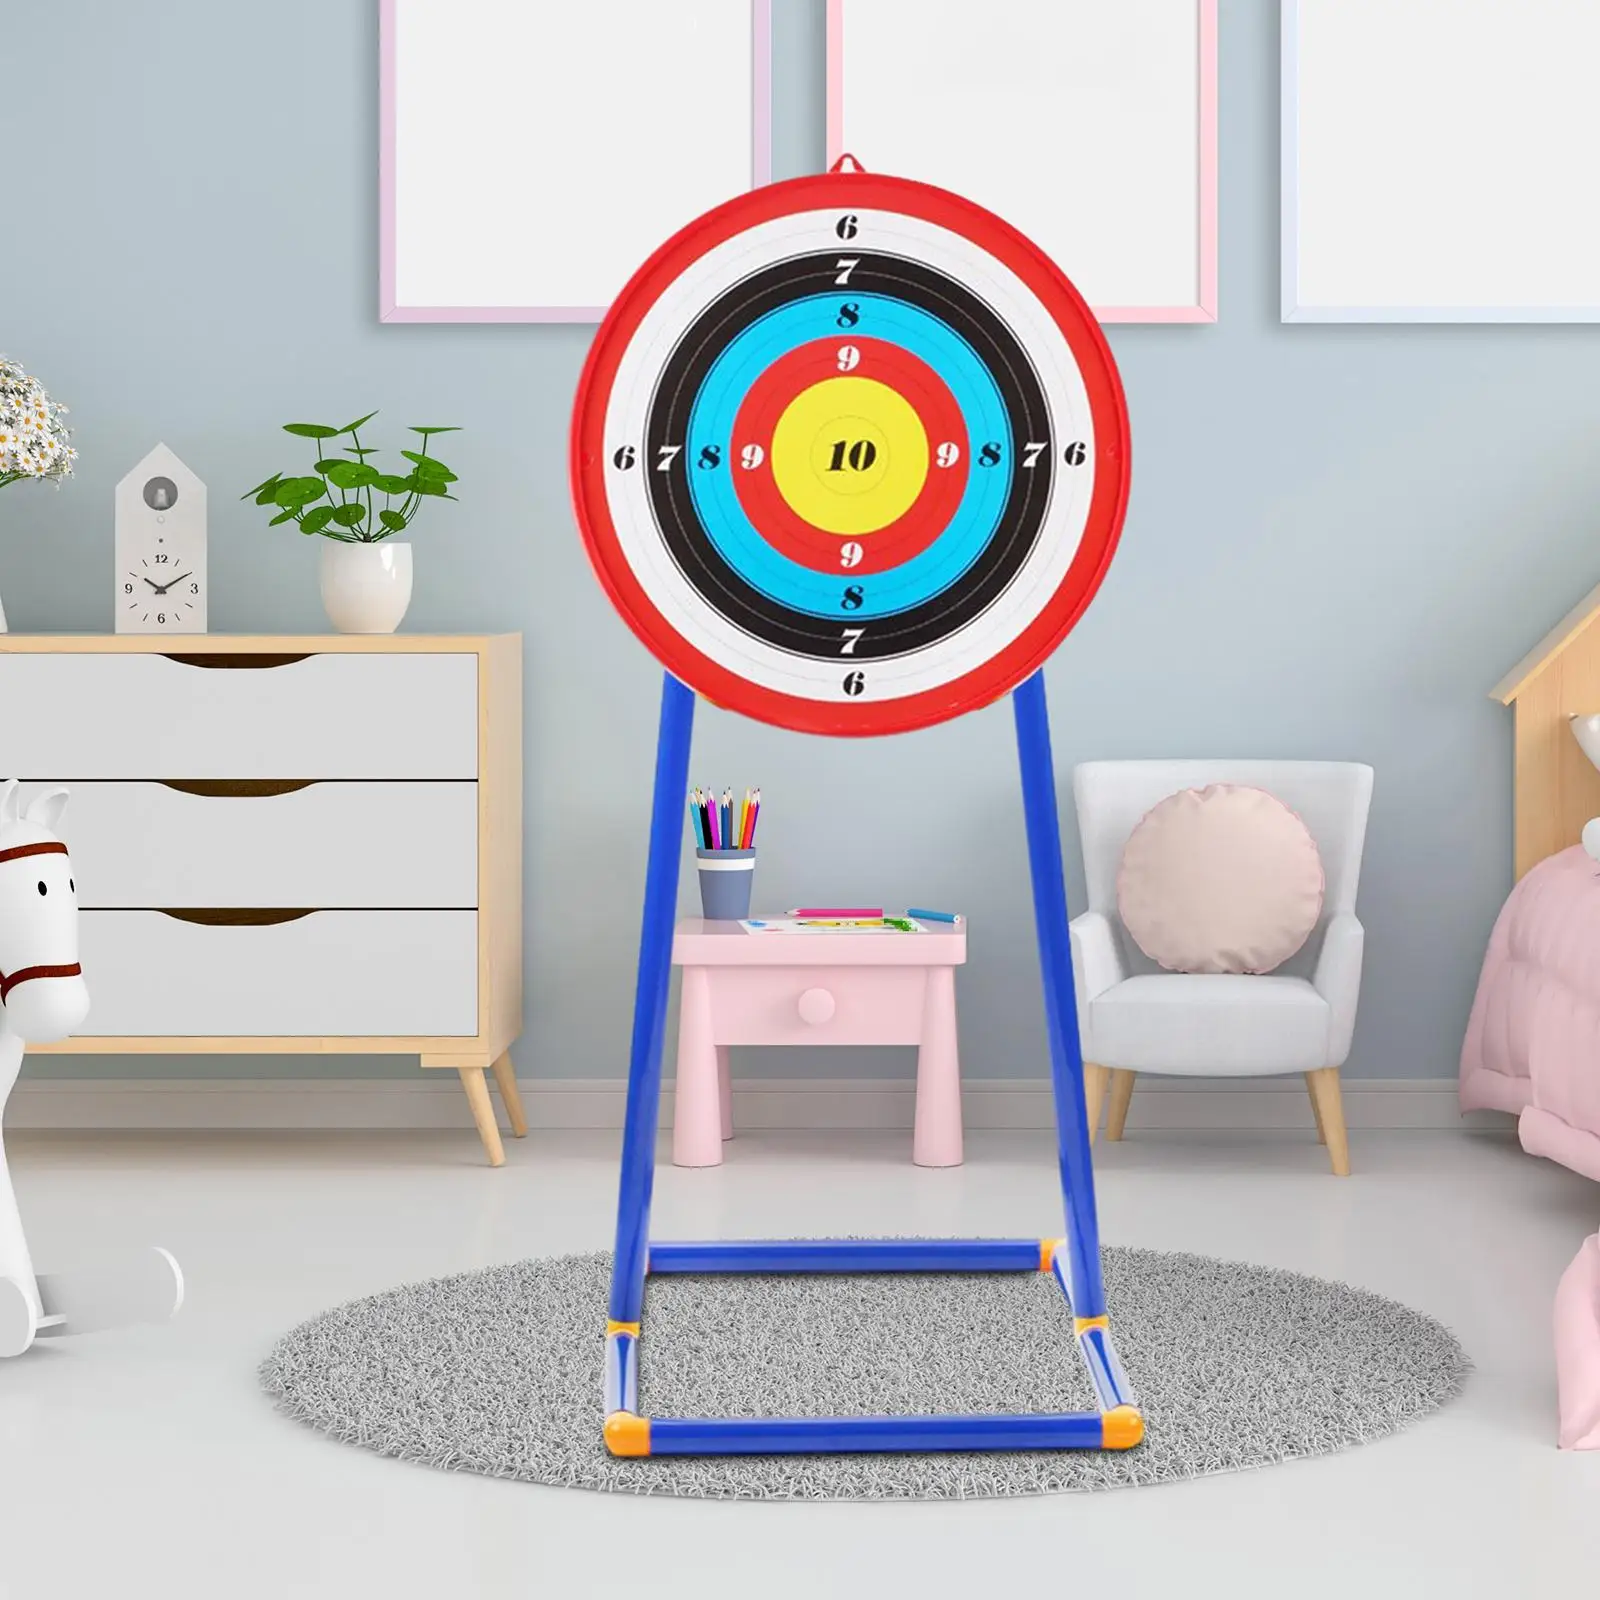 Standing Target Easy to Use Kids Suction Cup Indoor Outdoor Hanging Target